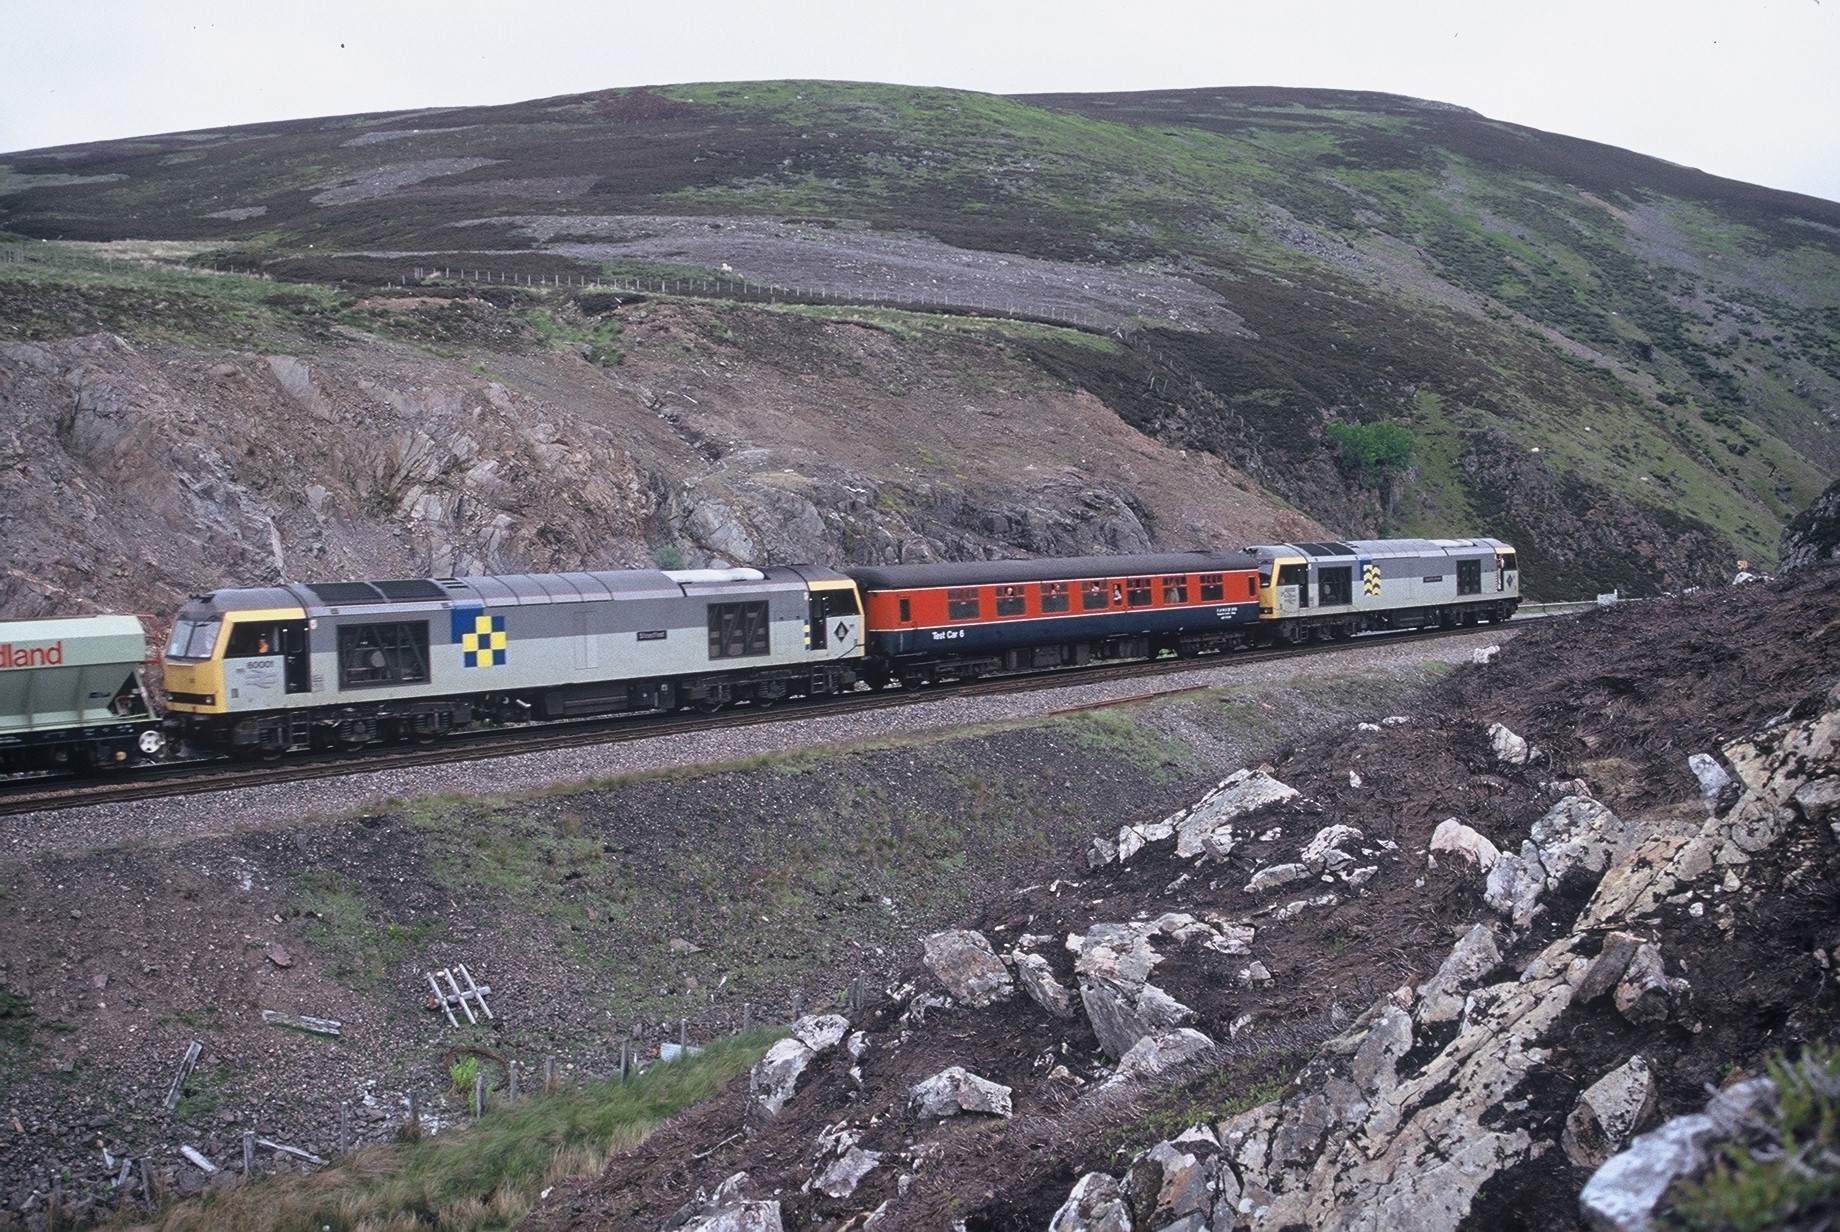 60002 leading Test Car 6, 60001 and a rake of Redland hoppers approaching Sloch’d summit, 10th June 1990. Robin Ralston